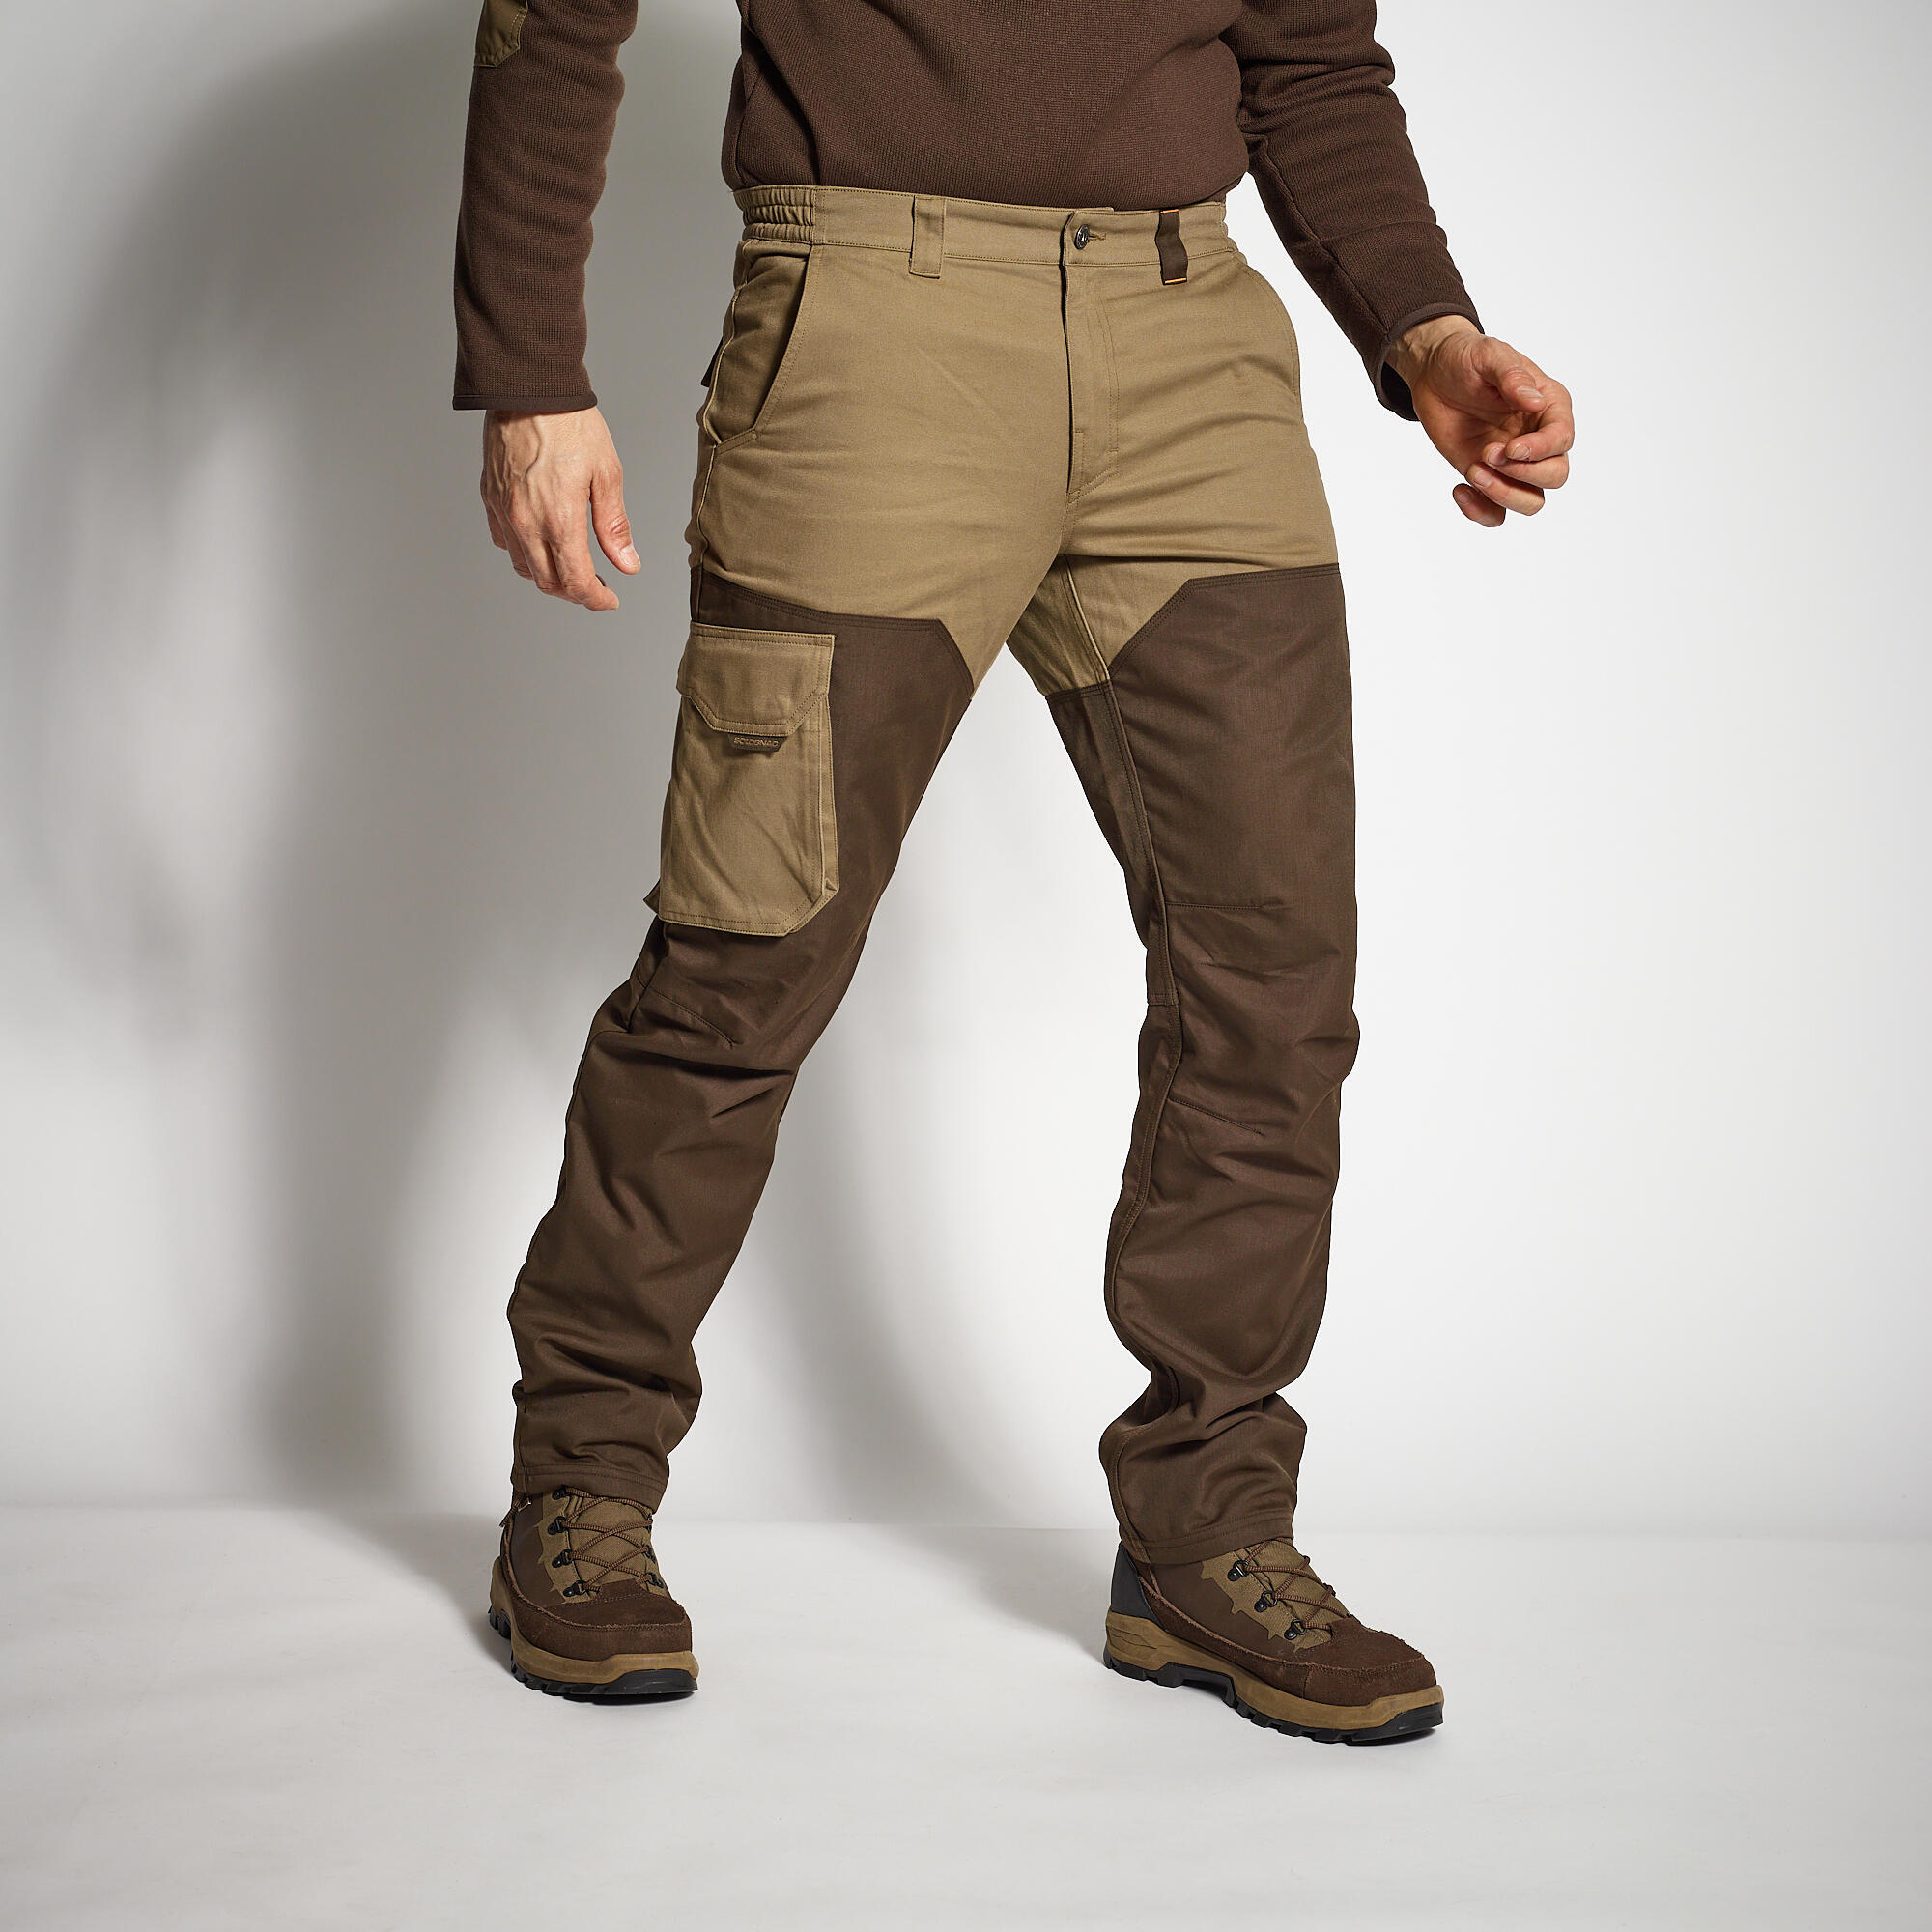 Reinforced Dry Weather Trousers - Brown 1/8